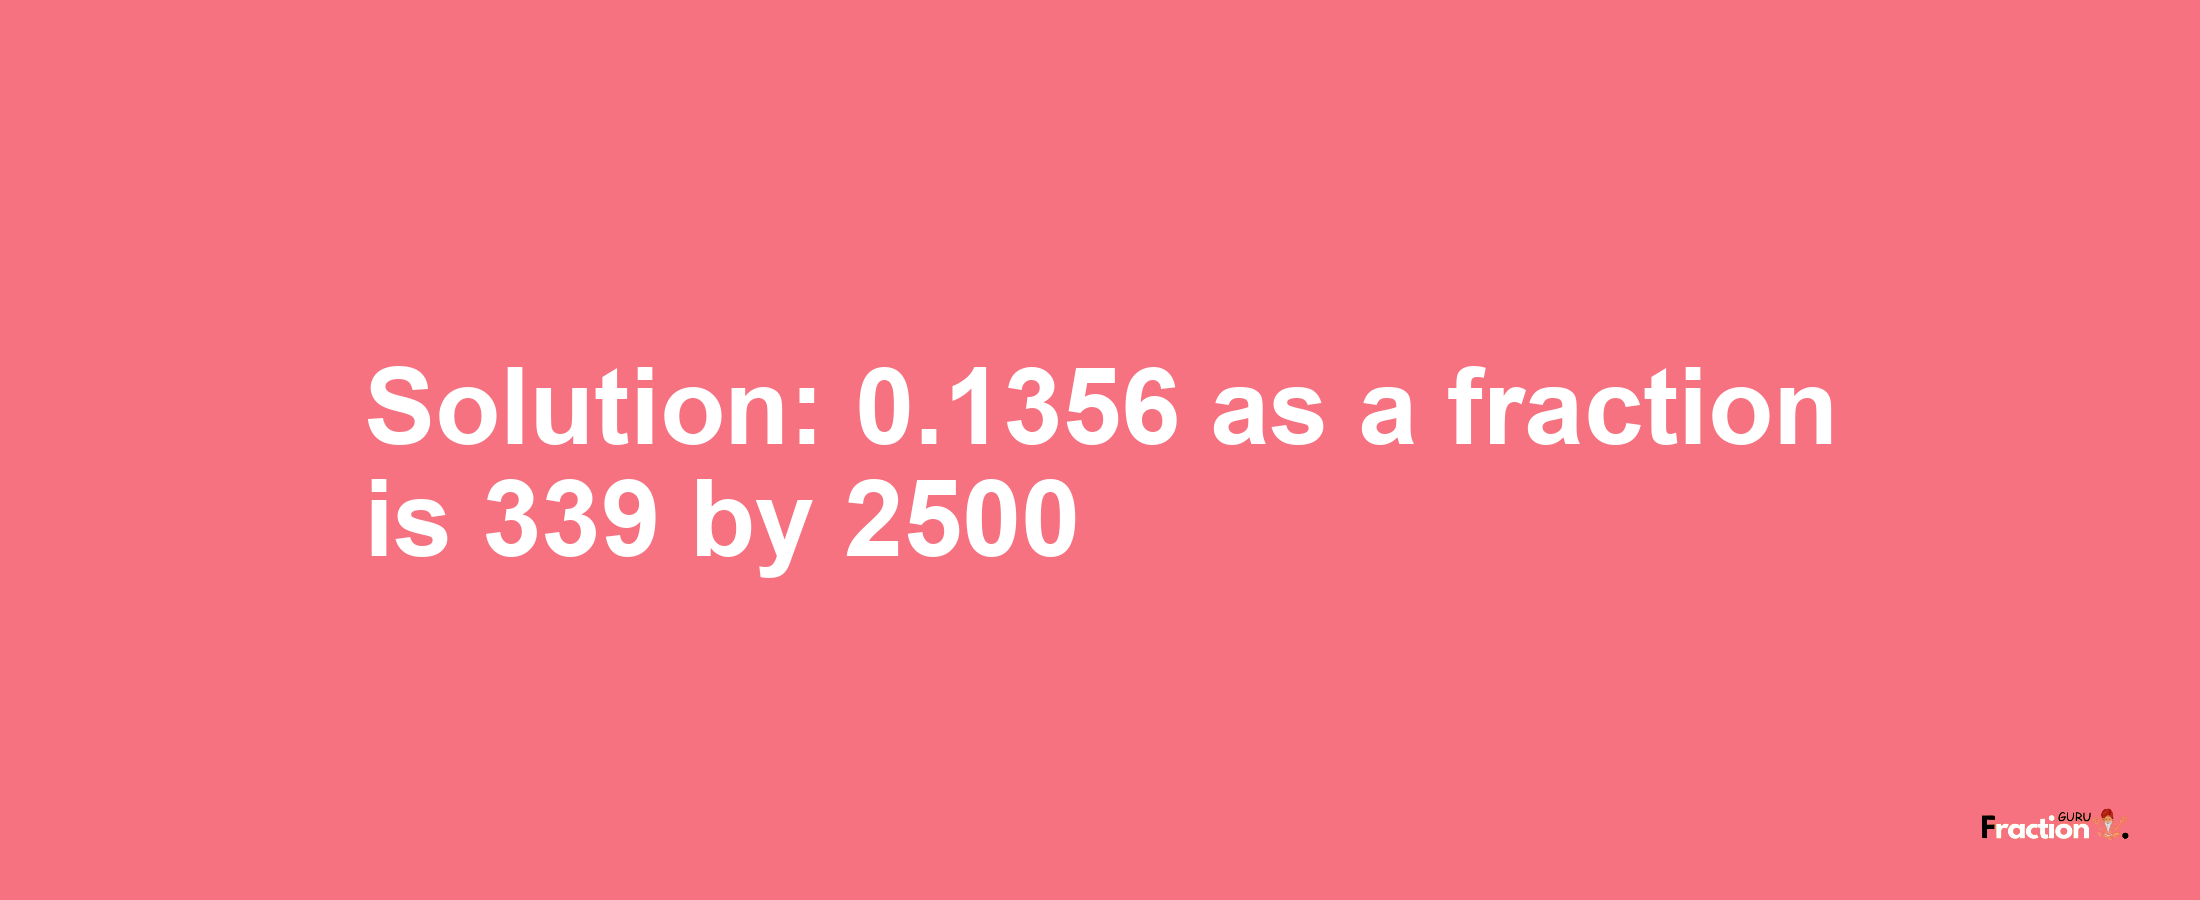 Solution:0.1356 as a fraction is 339/2500